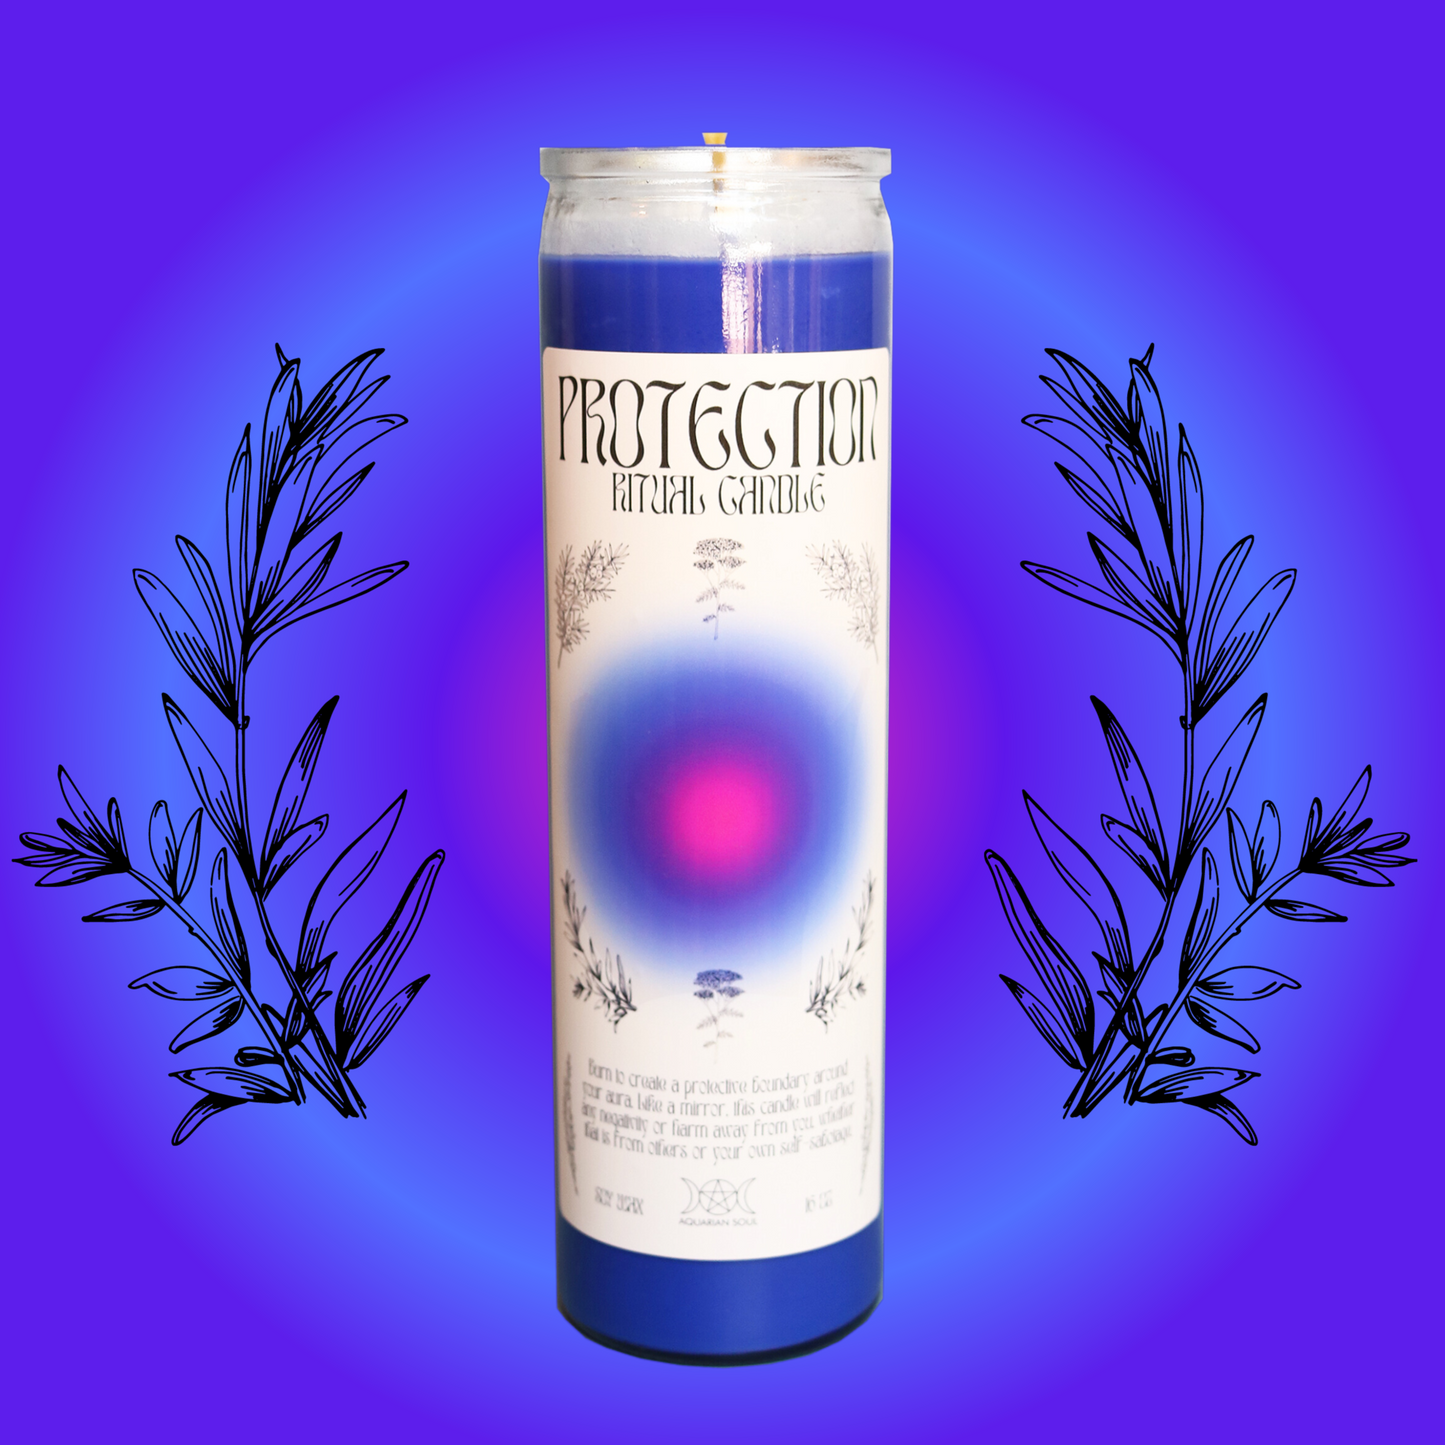 Protection 7 Day Ritual Candle